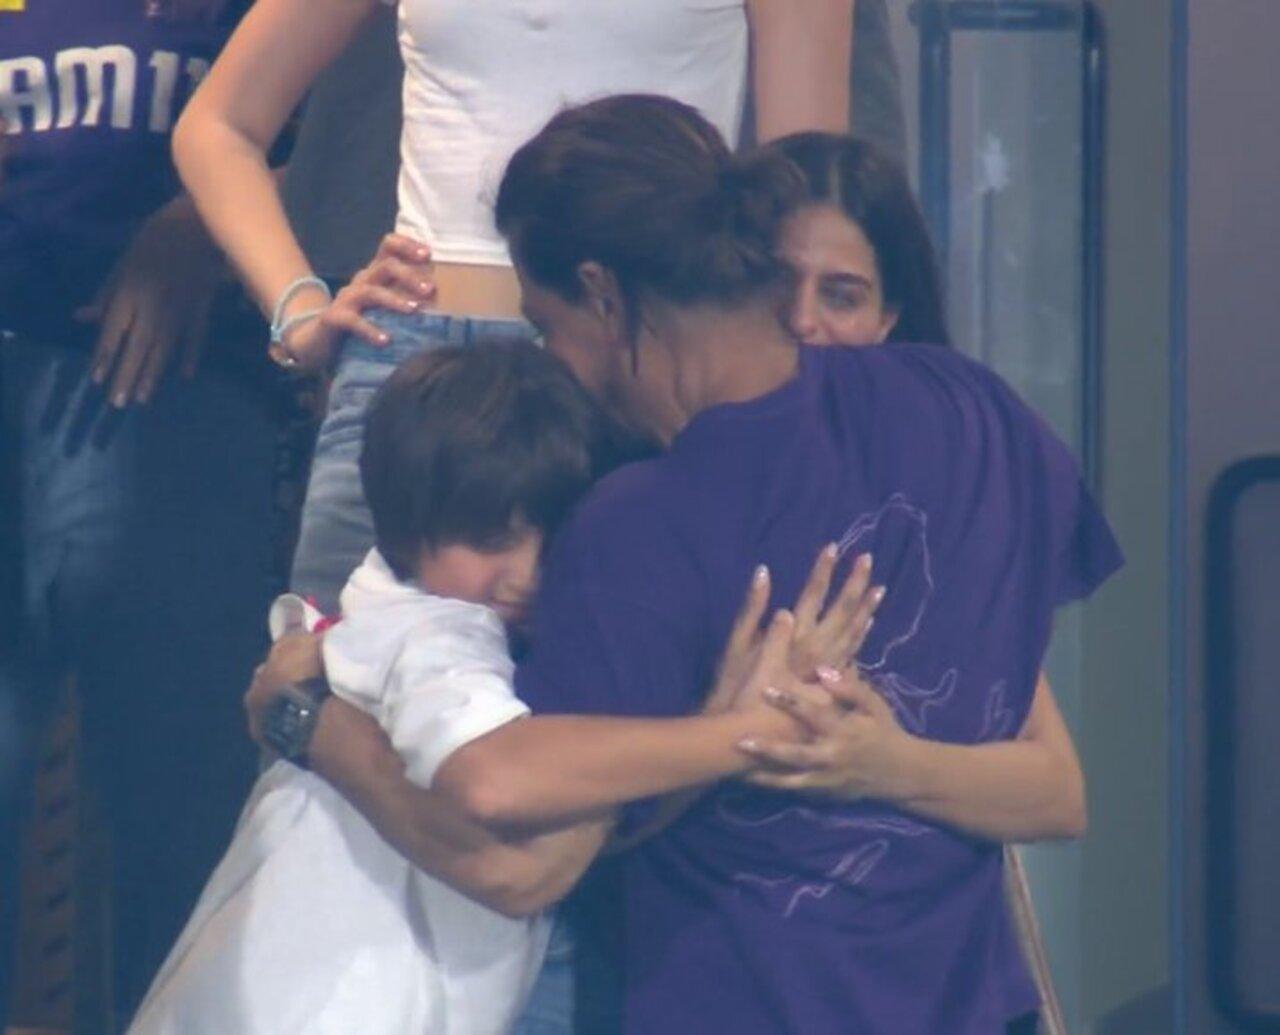 The night before his birthday, AbRam was seen with his family in Chennai for the IPL final as Khan's team KKR and SRH battled it out for the trophy. After KKR emerged victorious, AbRam was seen heading to hug his father and sister, Suhana